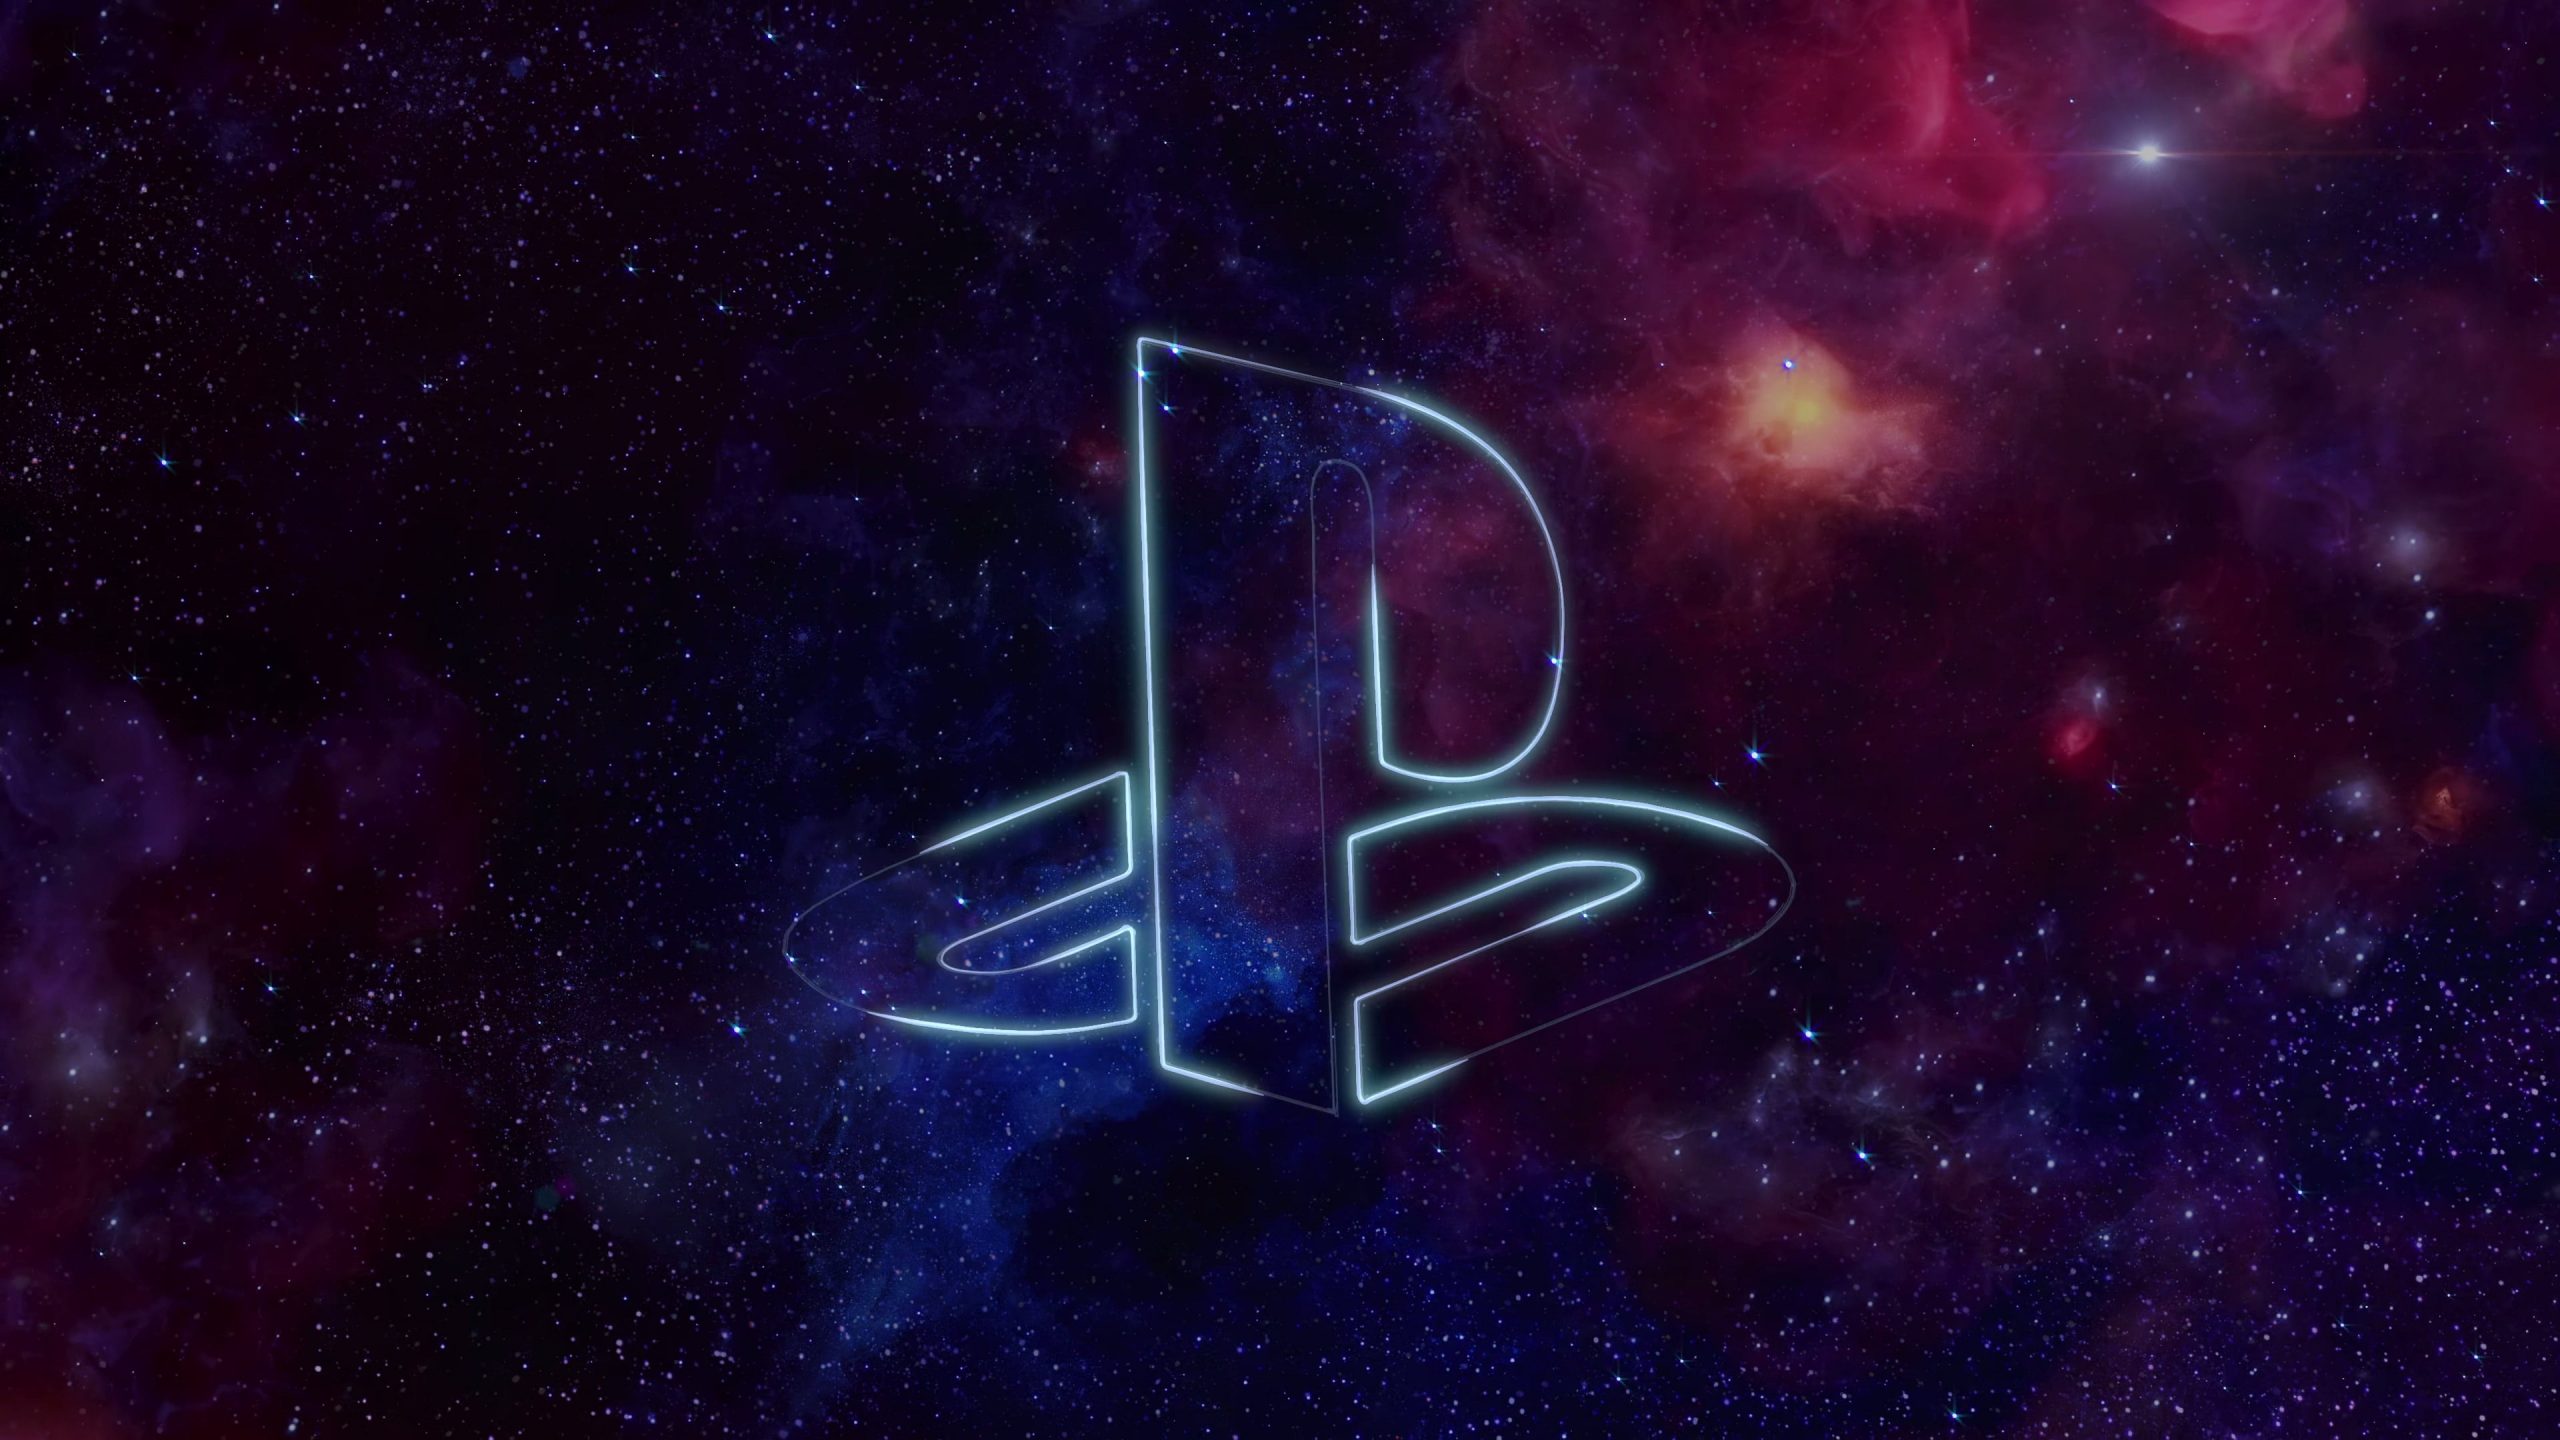 Ps4 wallpaper, HD, 4k, computer, star - space, night, galaxy, astronomy